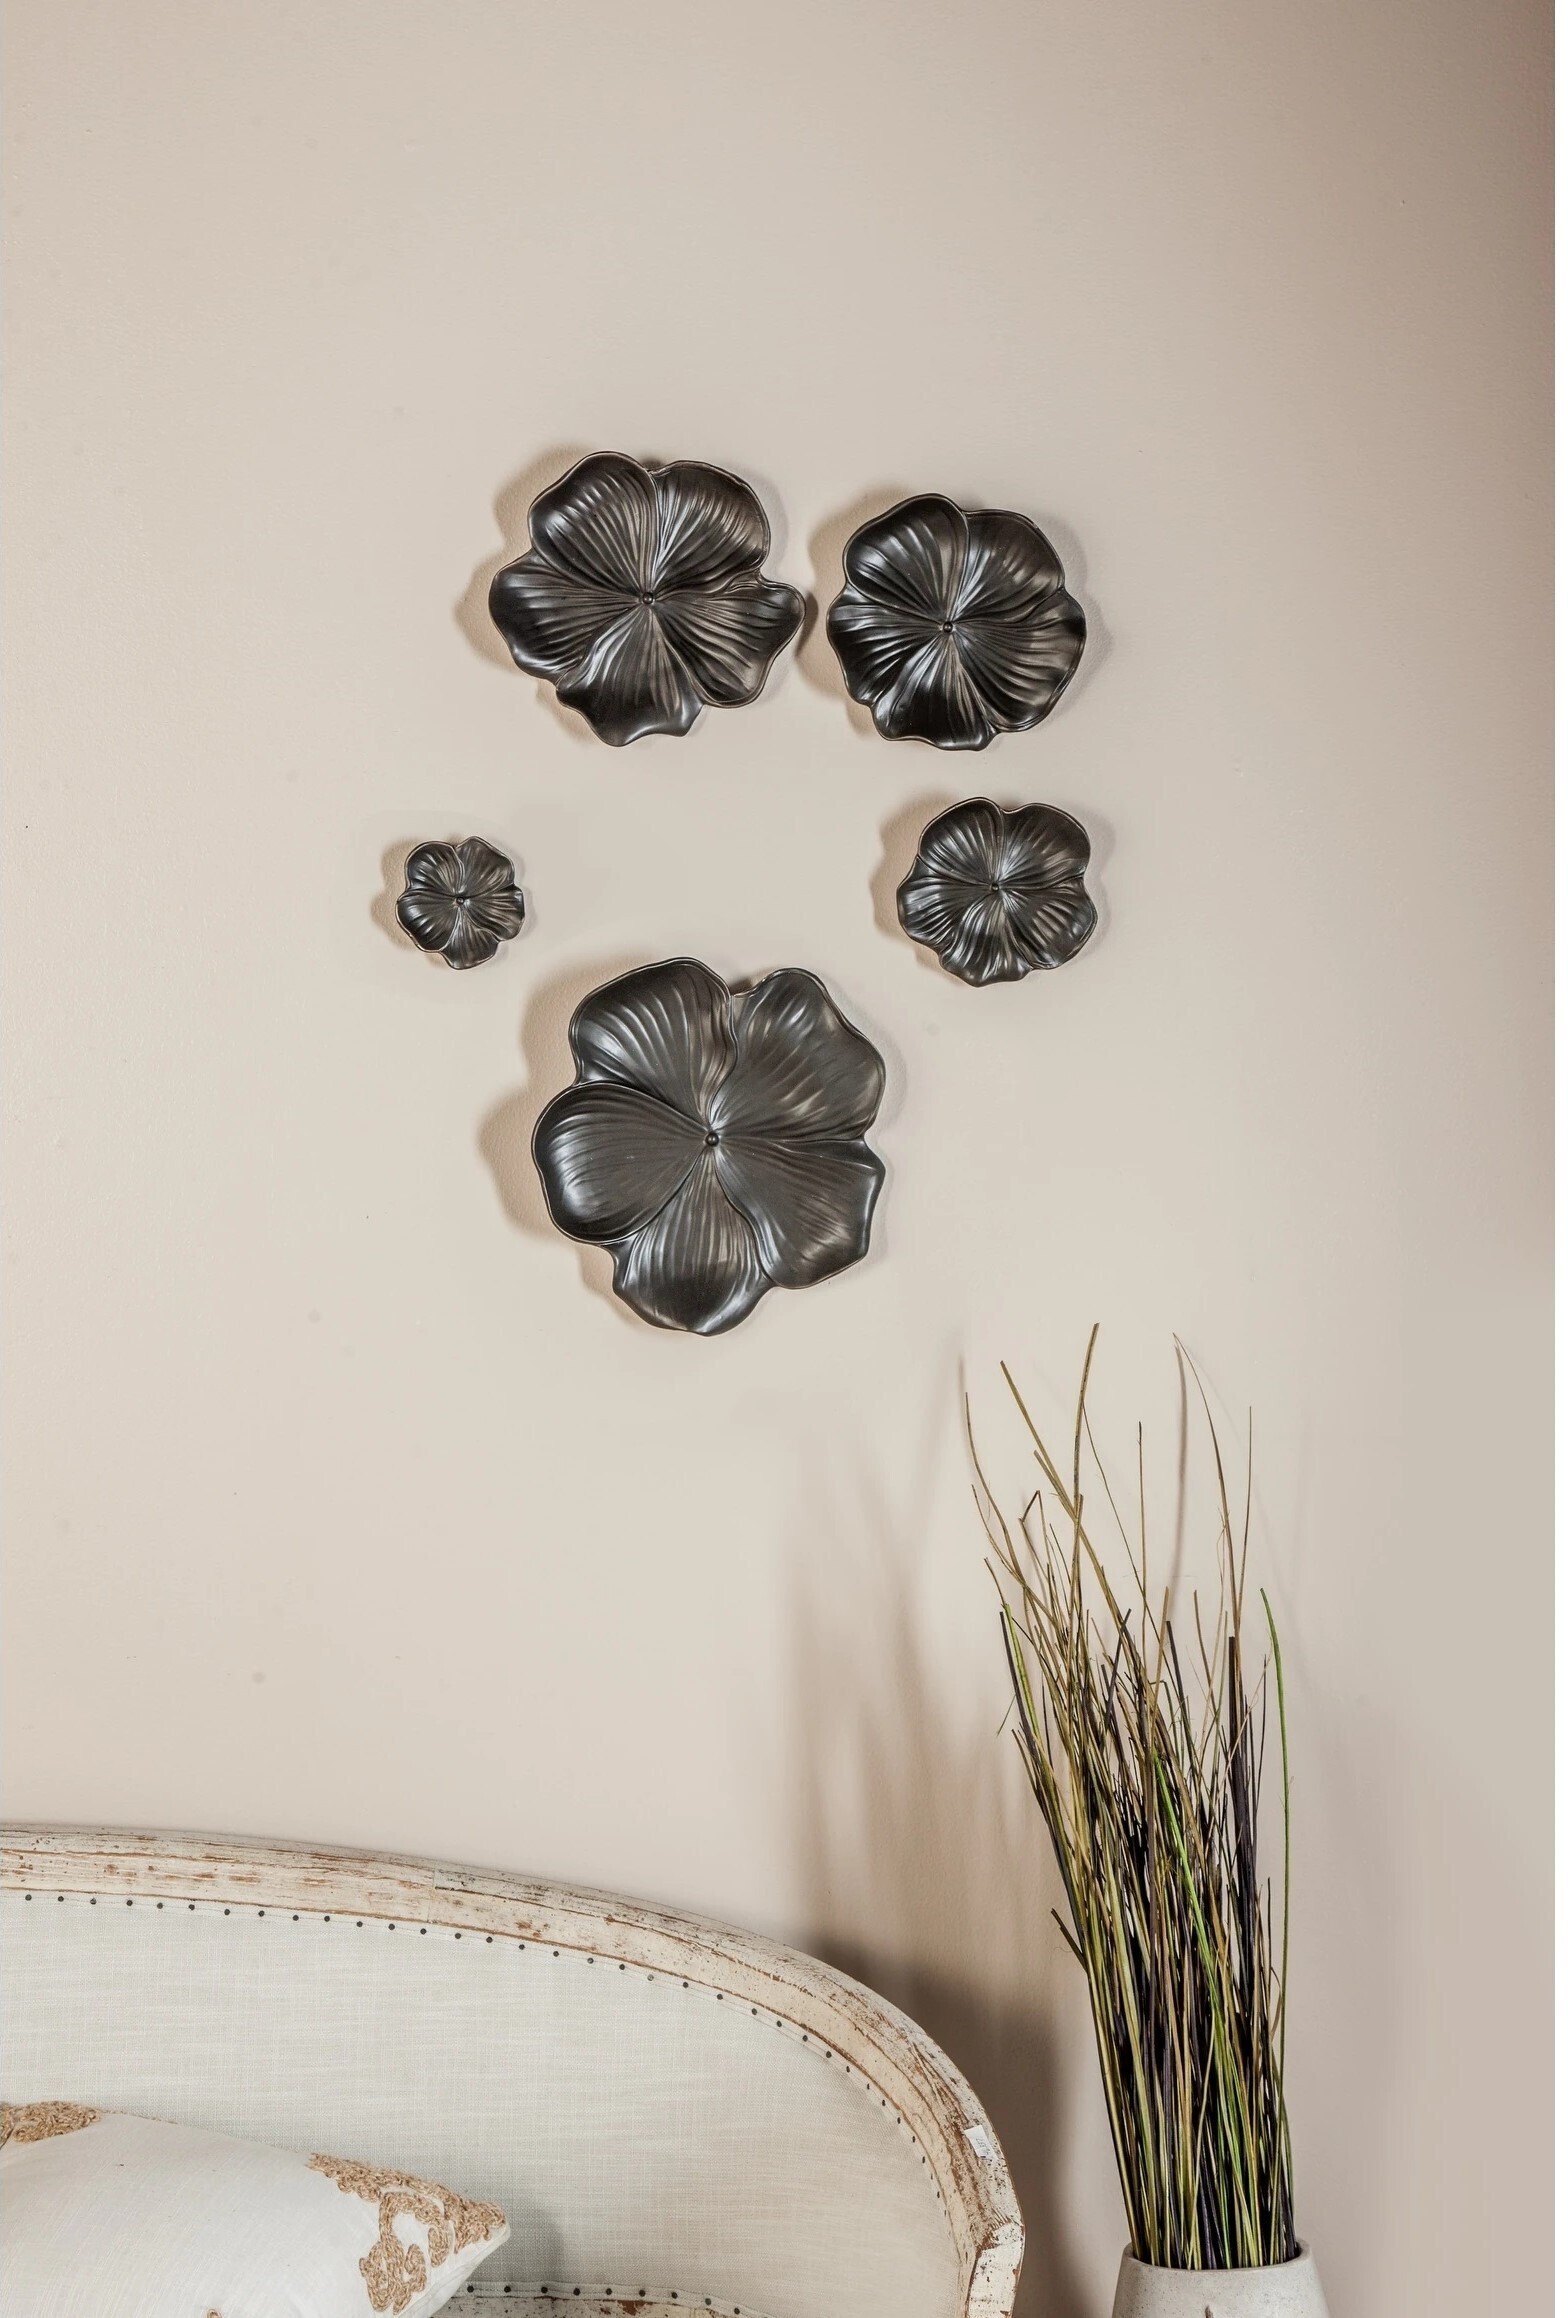 Cohesive set of ceramic flower wall decorations